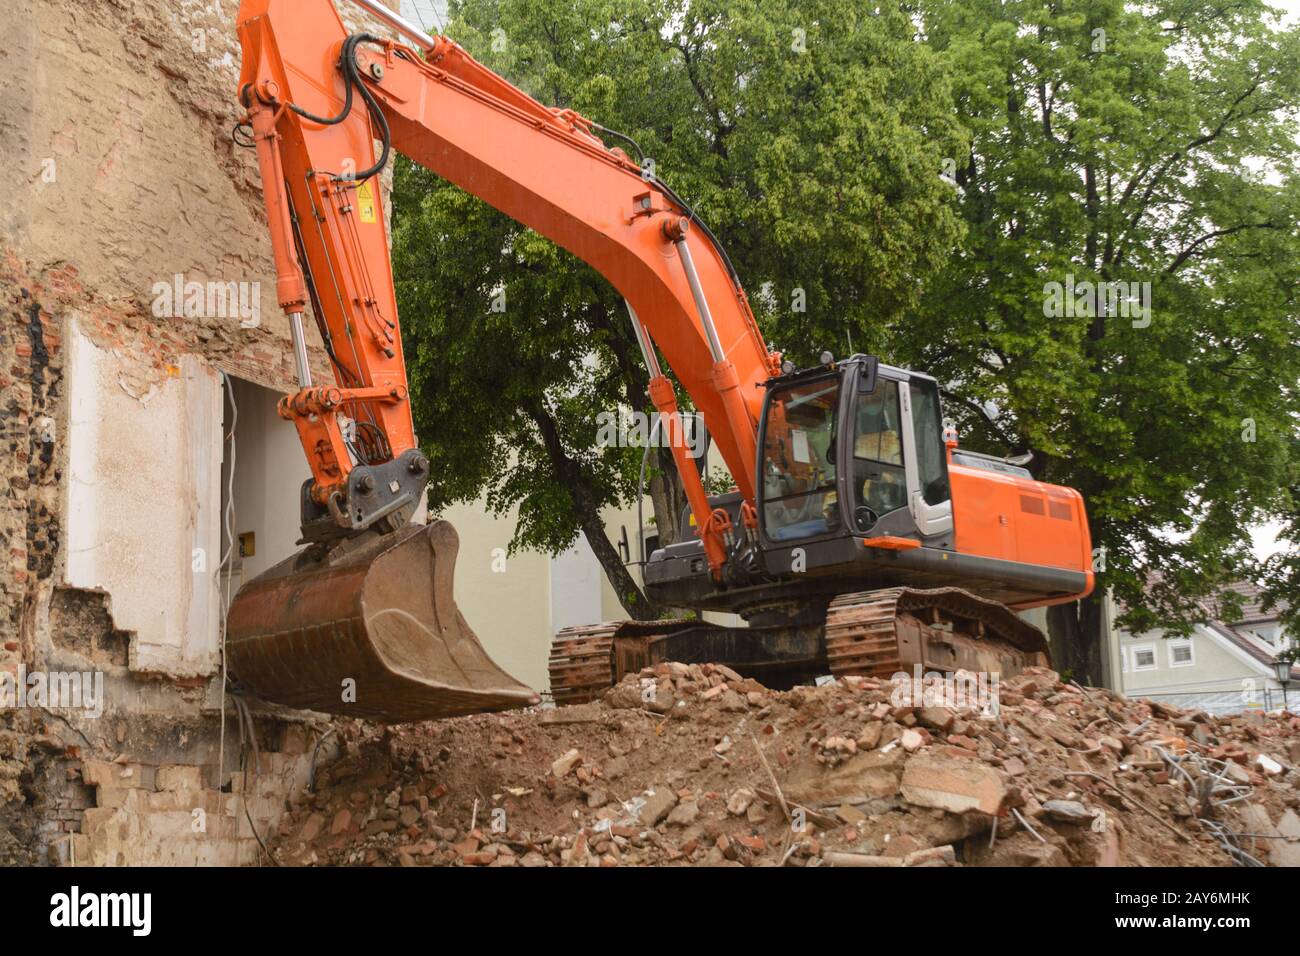 Demolition of a house by a bucket excavator - Building site renovation of an old house Stock Photo